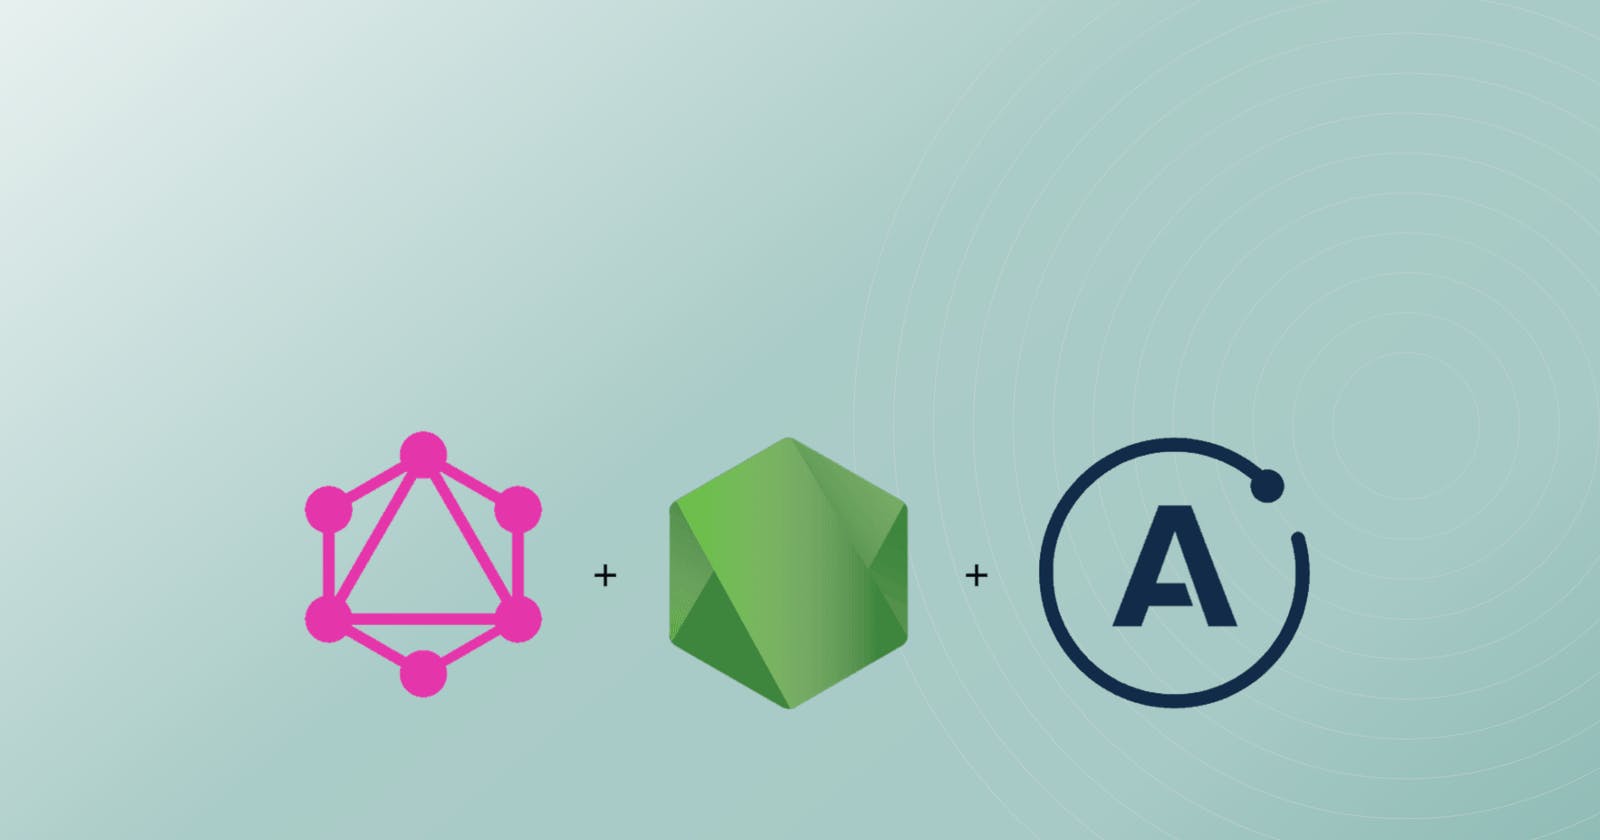 Building GraphQL API with Nodejs, TypeGraphQL , Typegoose and Troubleshooting common challenges.